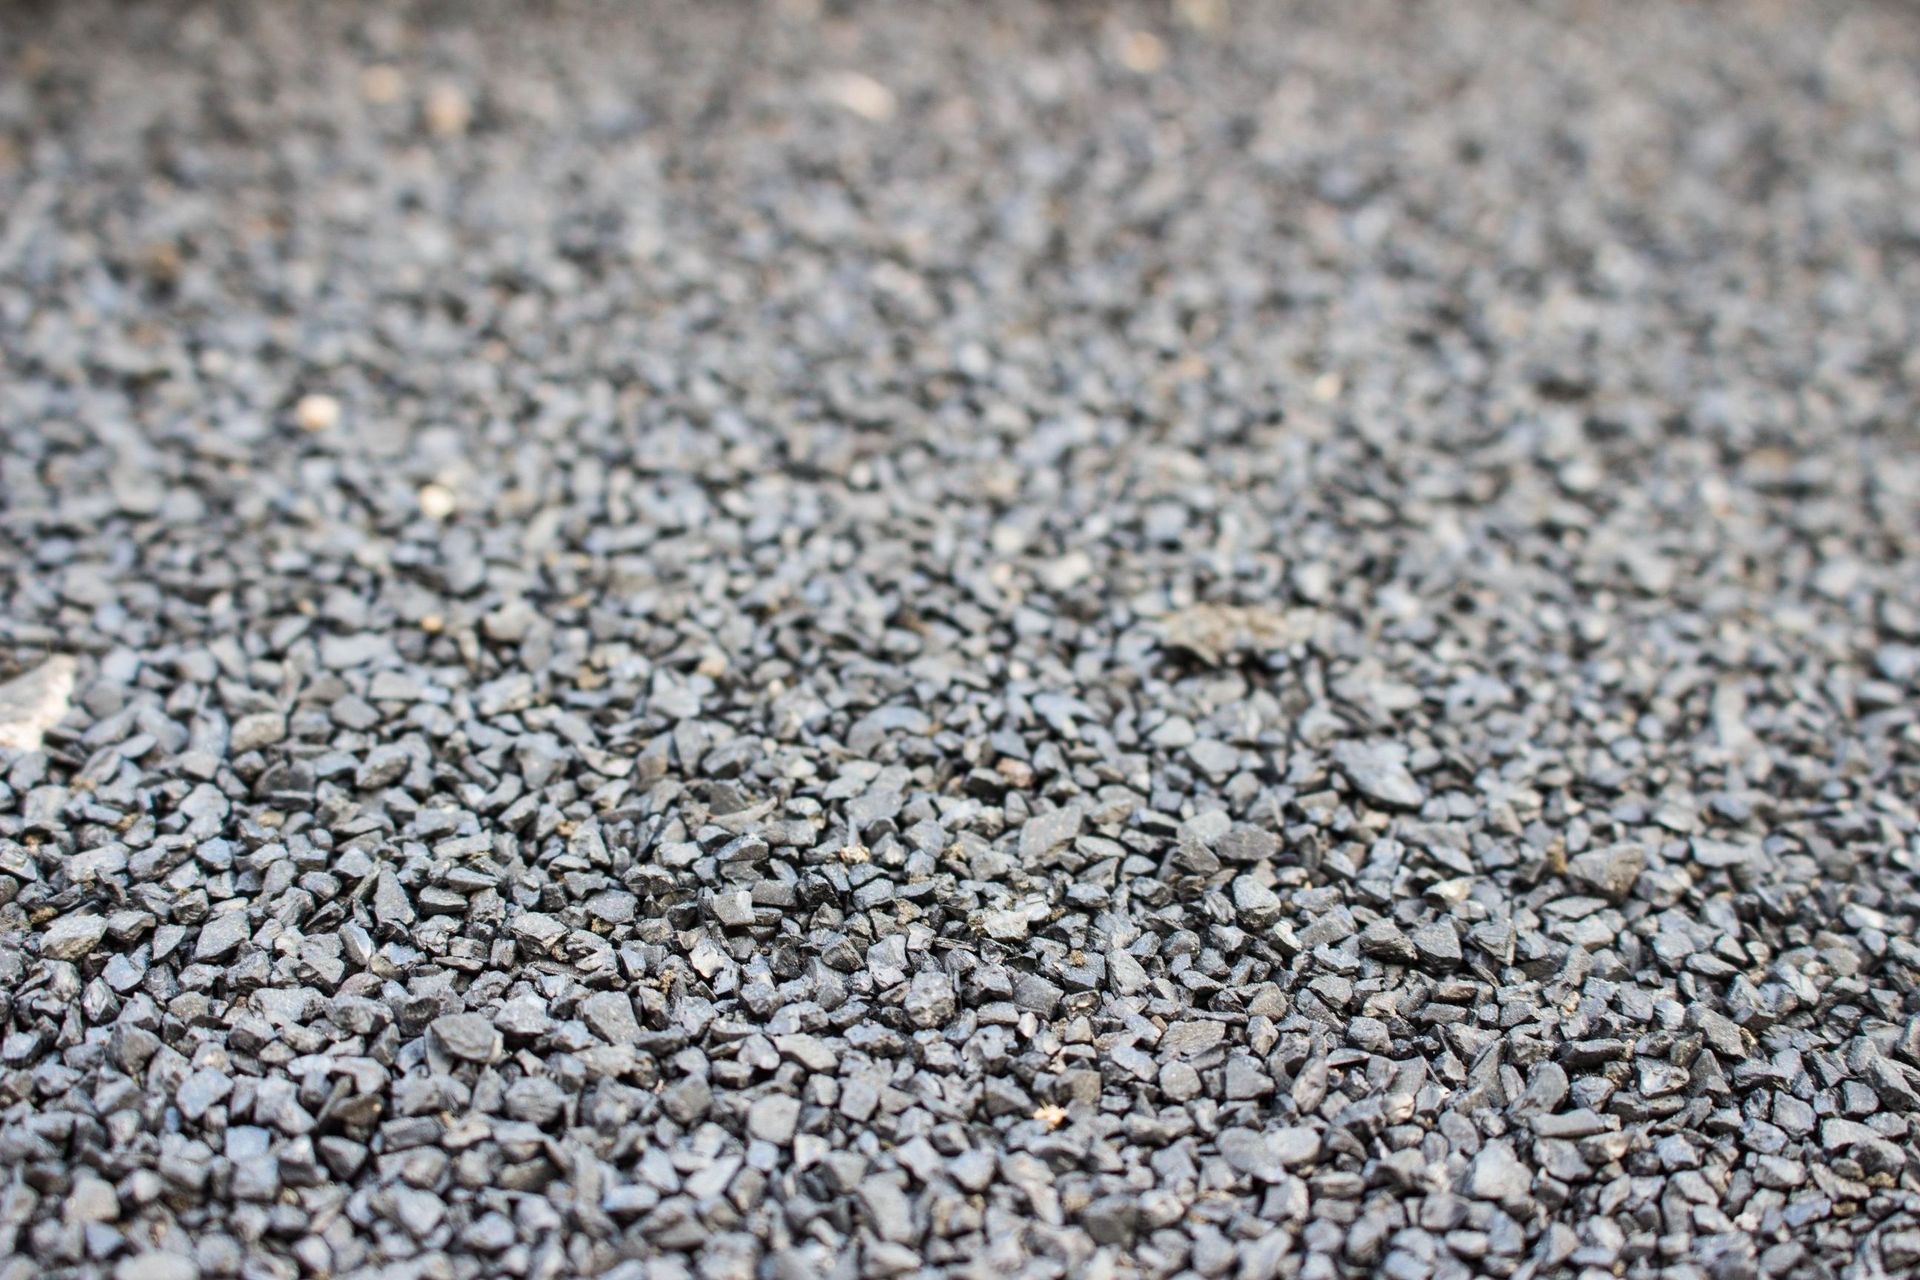 A close up of a pile of gravel on the ground